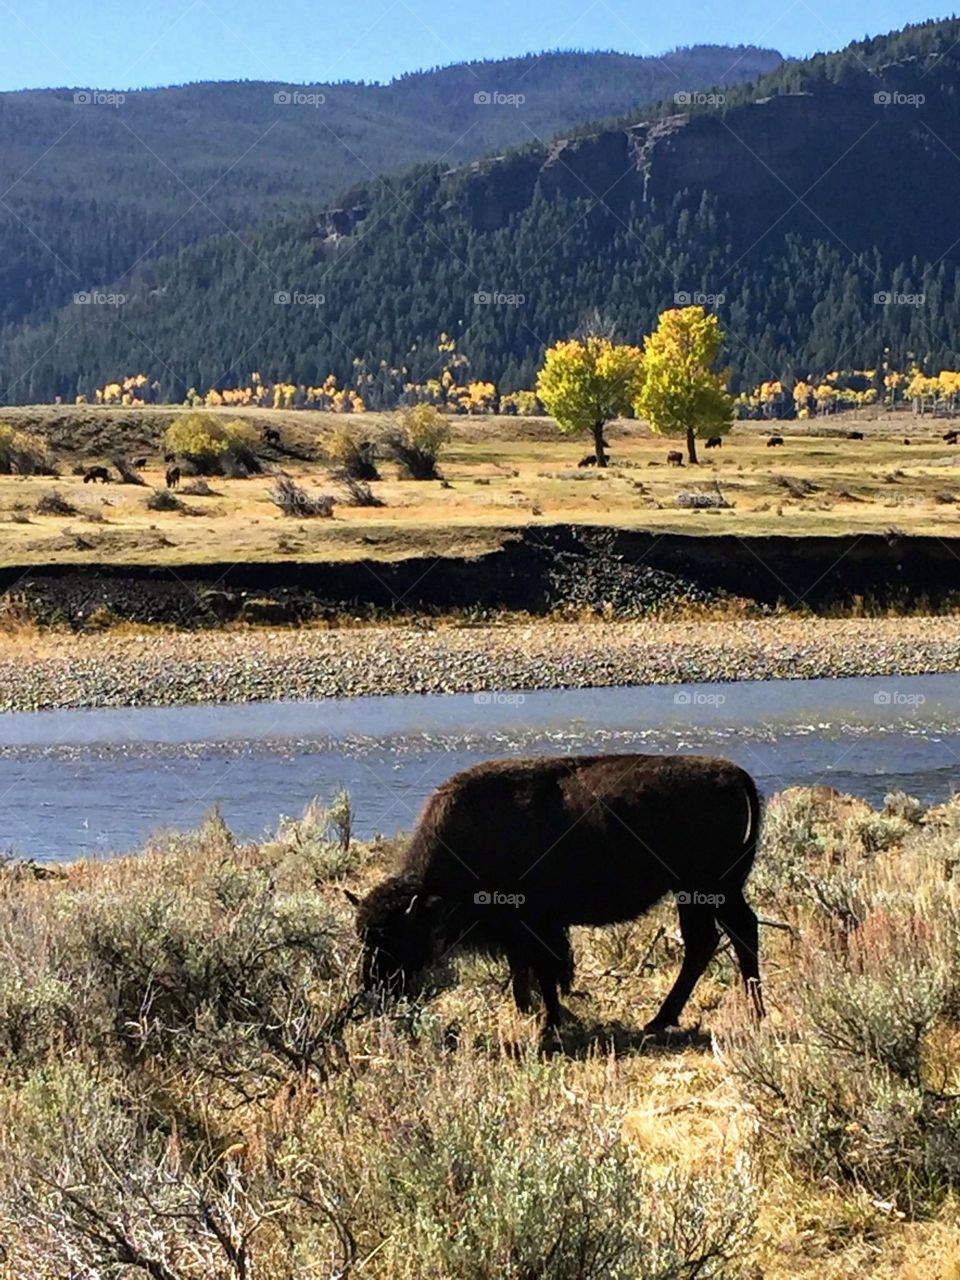 Buffalo  grazing by the stream with mountains in background in Montana on beautiful day.